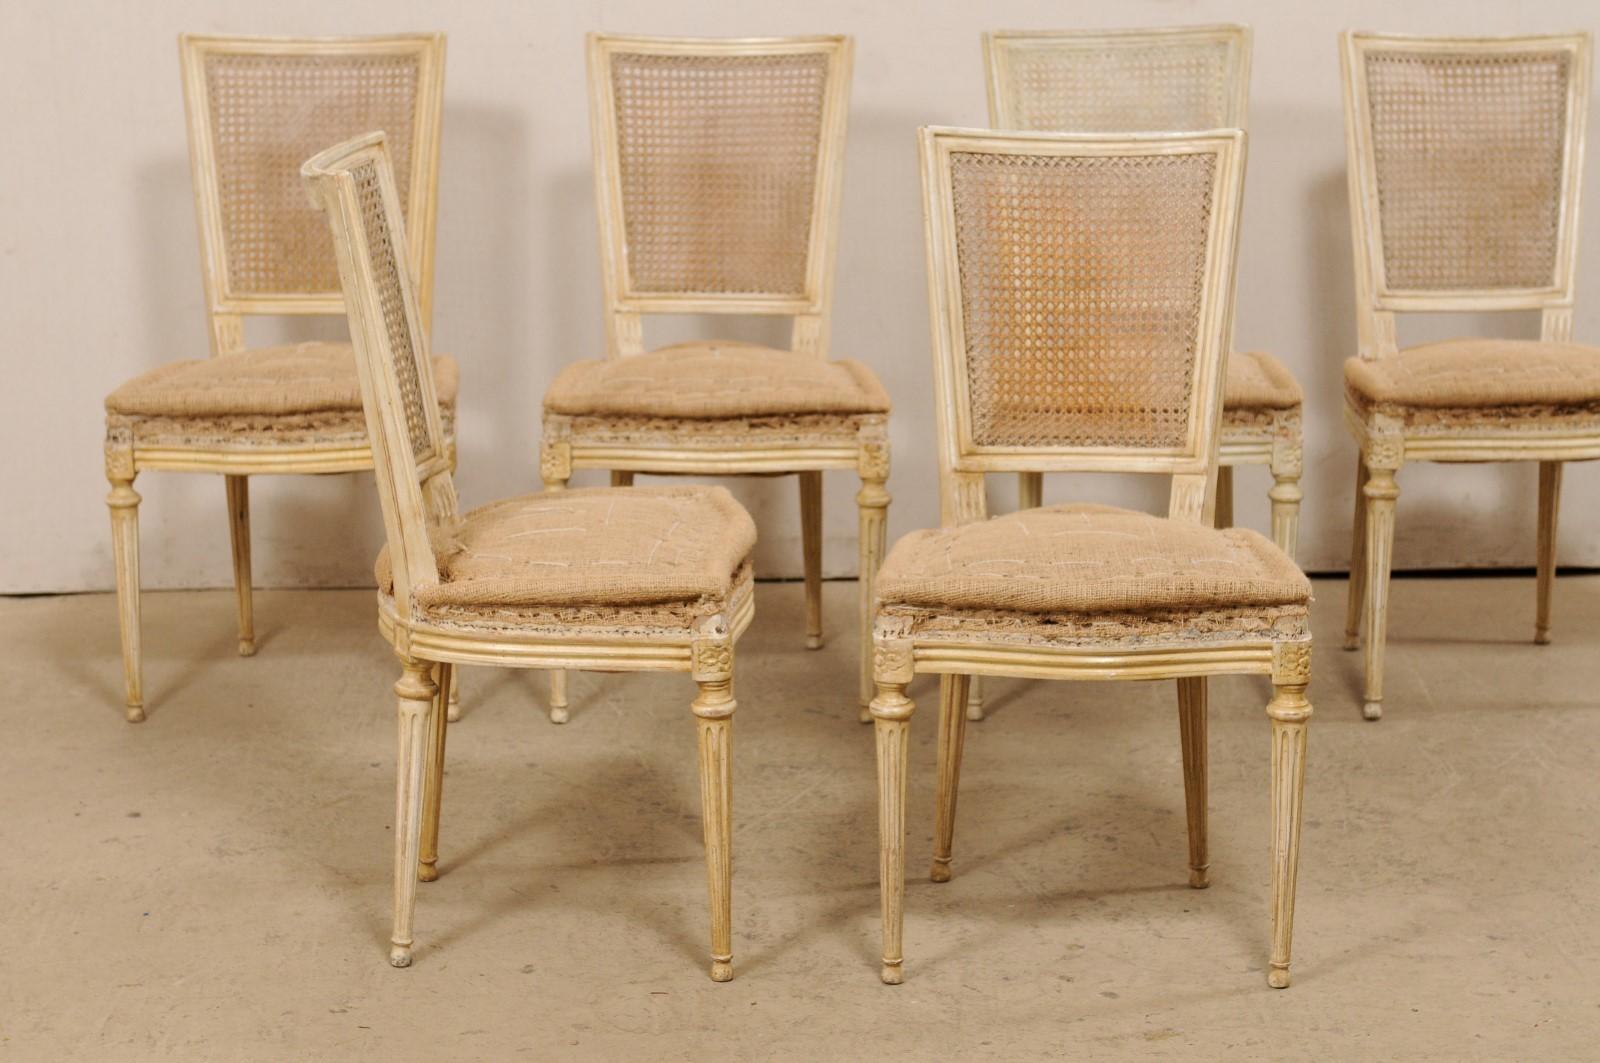 20th Century French Set of Six Louis XVI Style Cane Back Side Chairs, Early 20th C.